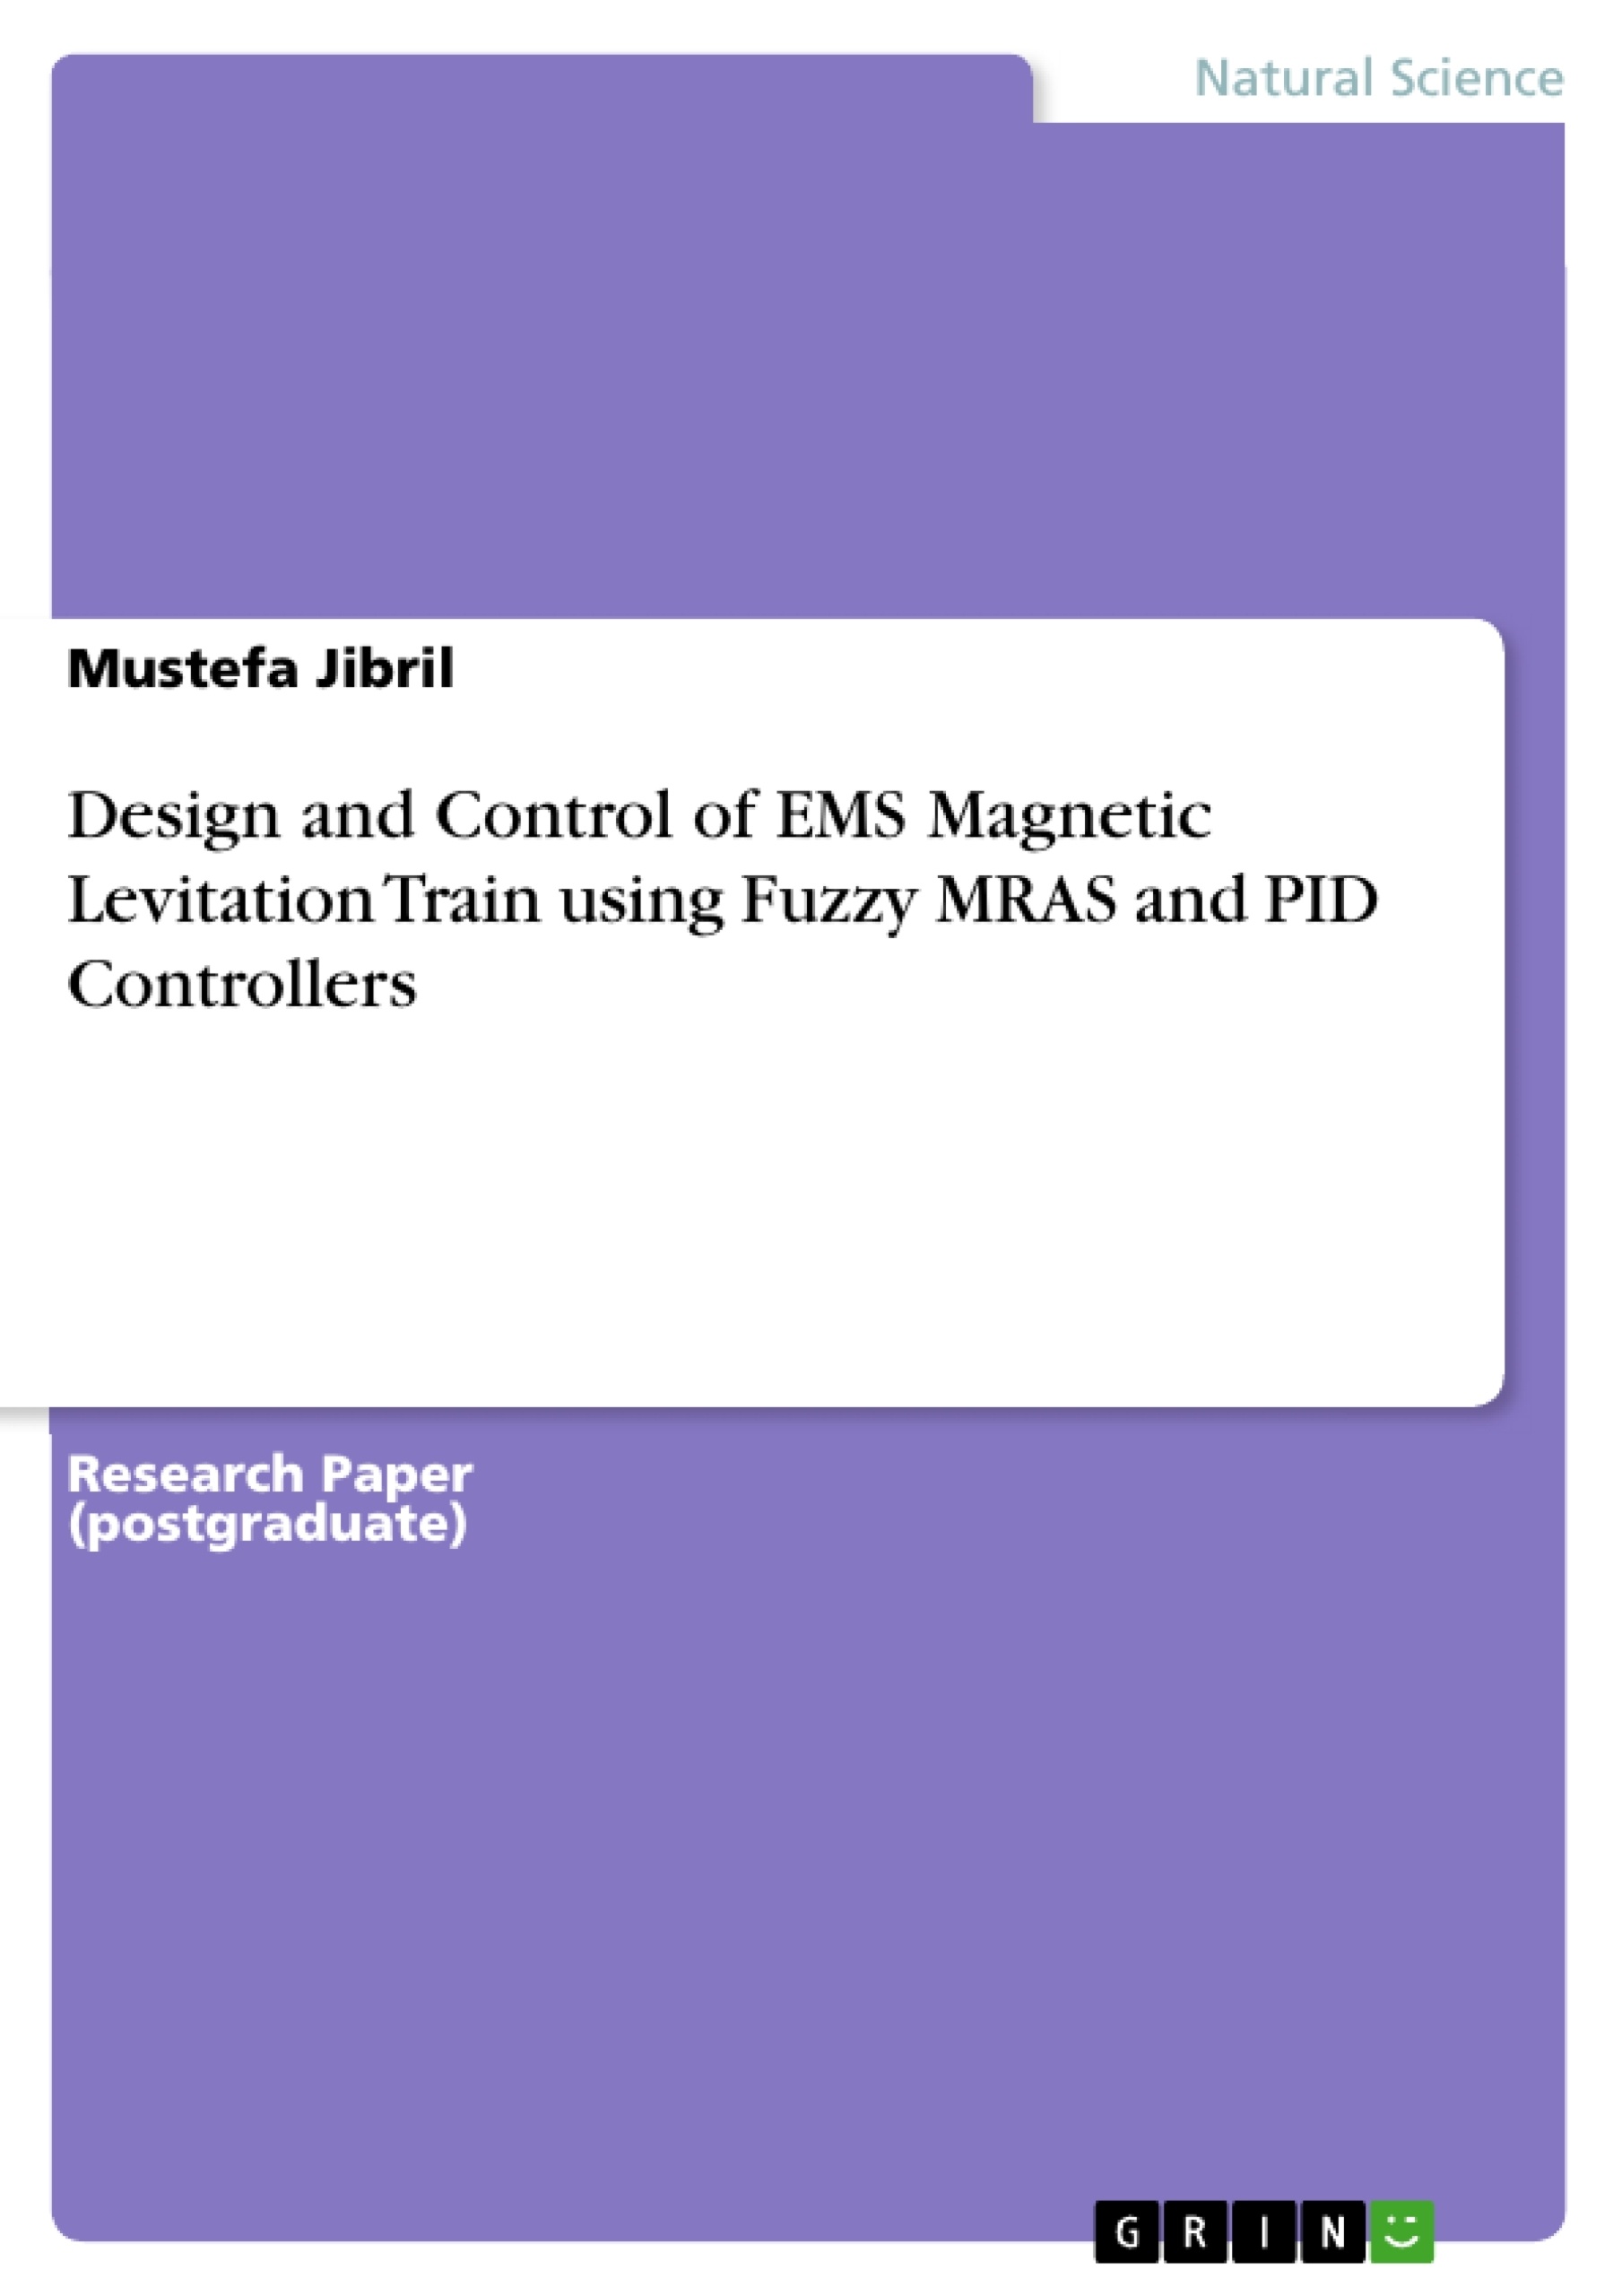 Titre: Design and Control of EMS Magnetic Levitation Train using Fuzzy MRAS and PID Controllers